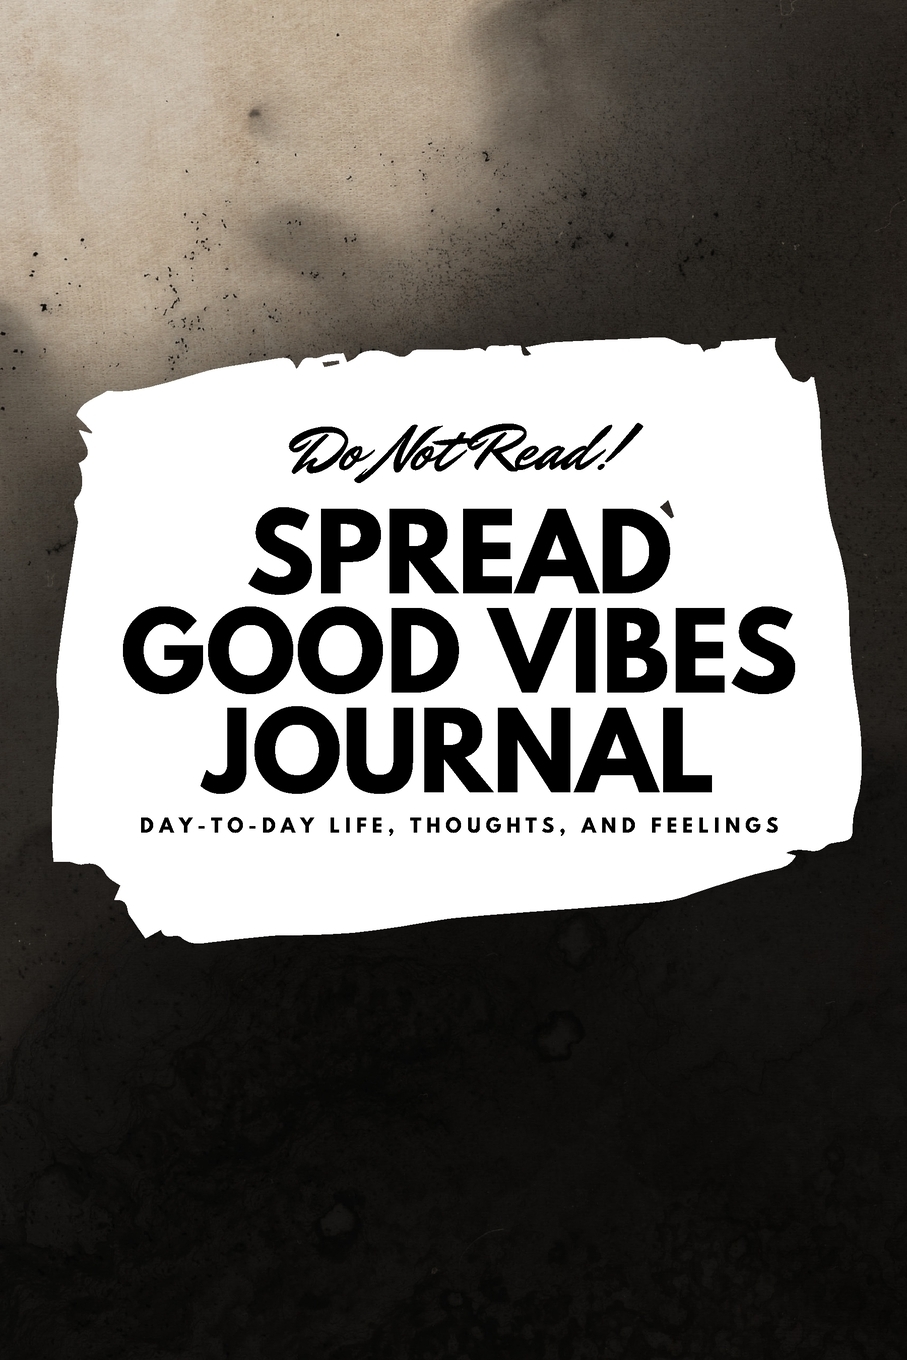 6x9 Blank Journal: Do Not Read! Spread Good Vibes Journal - Small Blank Journal - 6x9 Blank Journal (Softcover Journal / Notebook / Sketchbook / Diary) (Series #31) (Paperback) - image 1 of 1